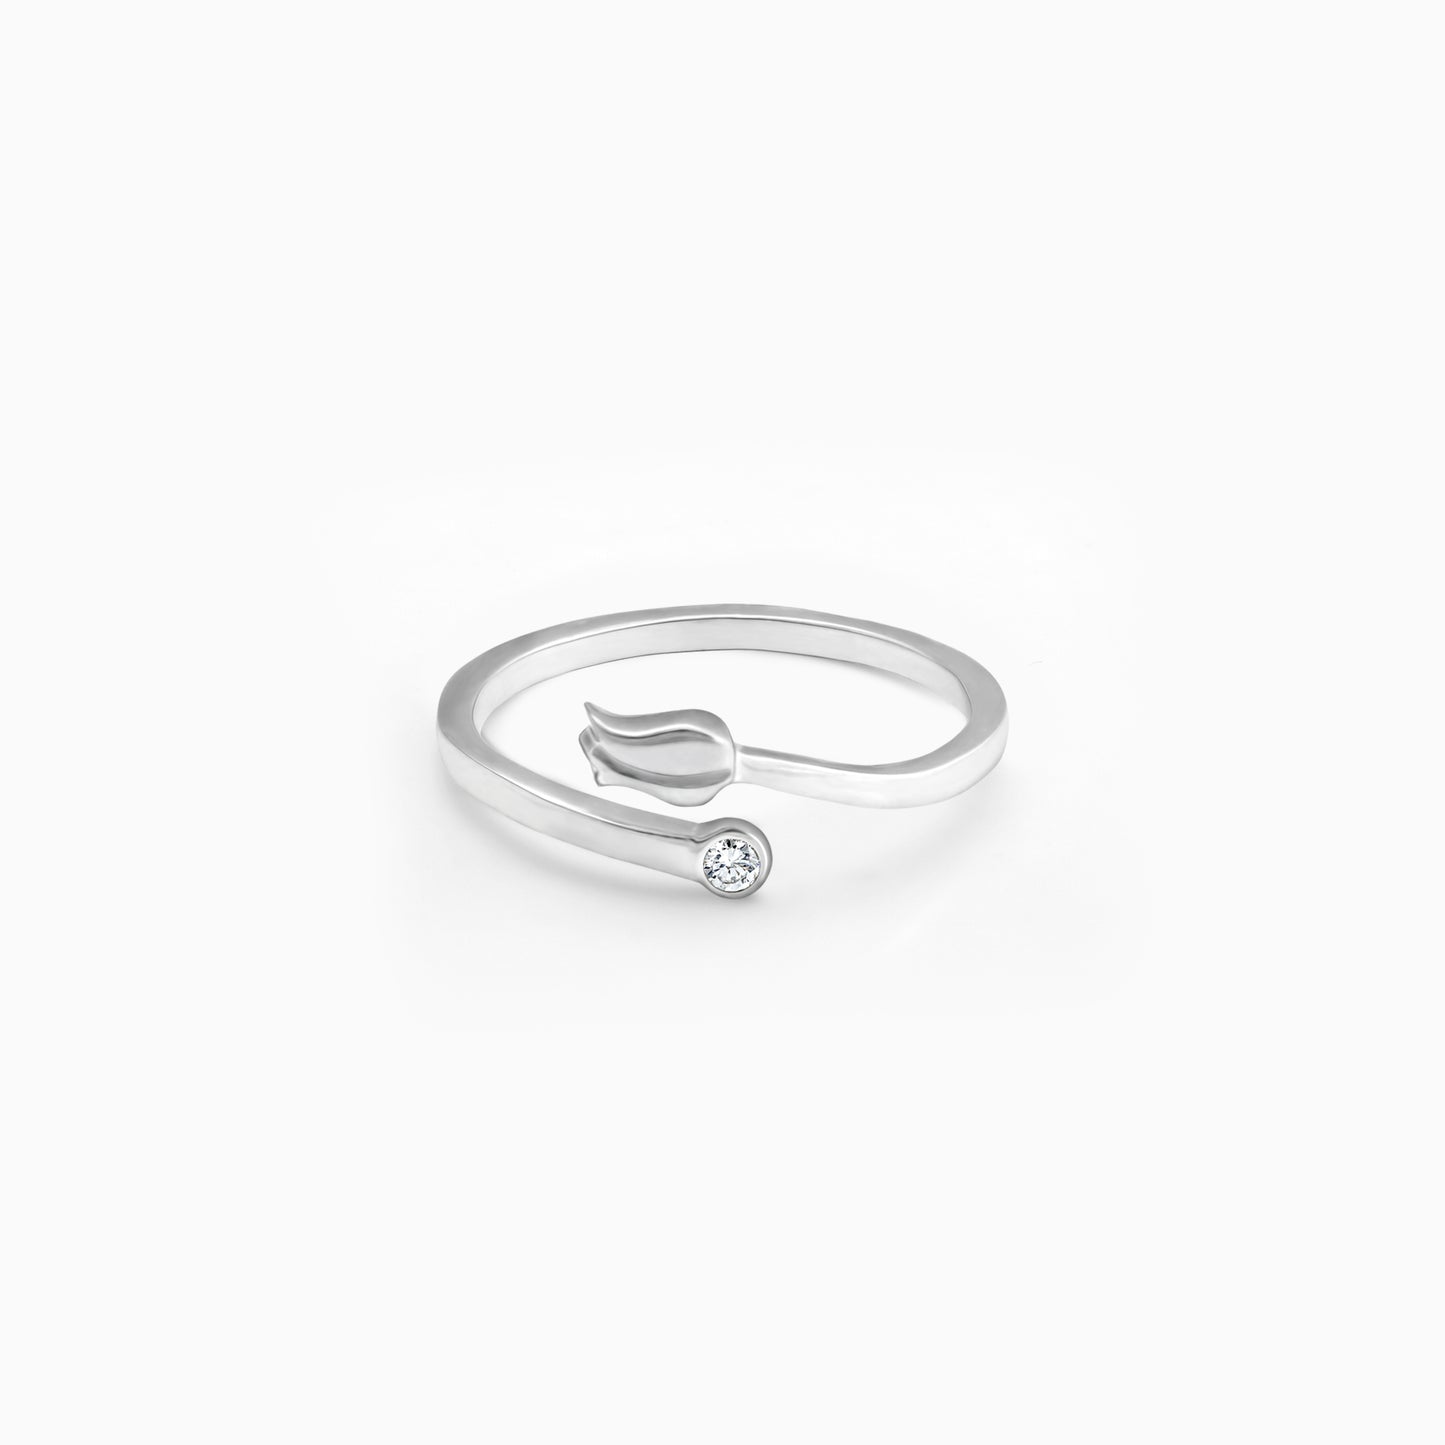 Silver Swift Silhouette Ring